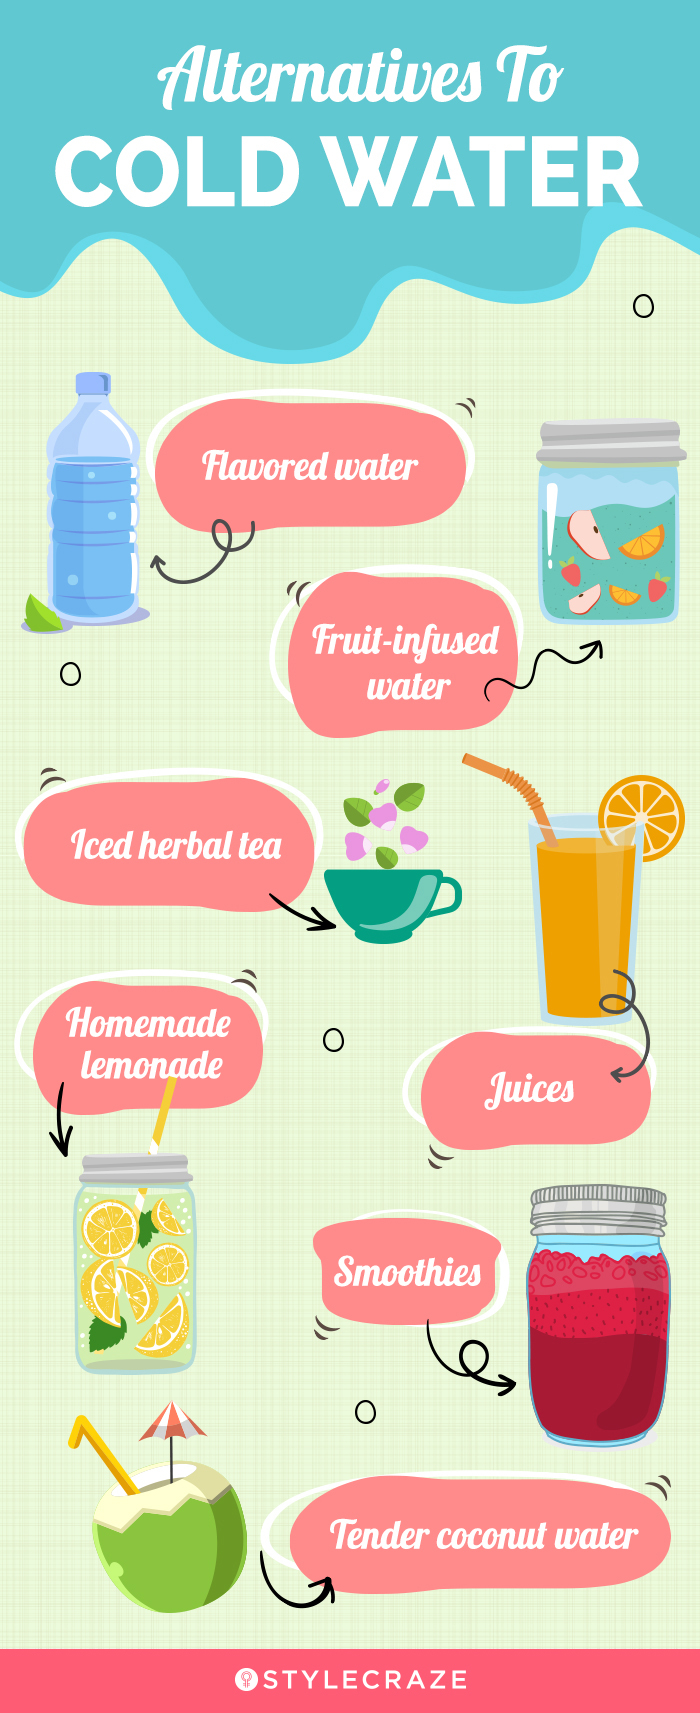 alternatives to cold water [infographic]